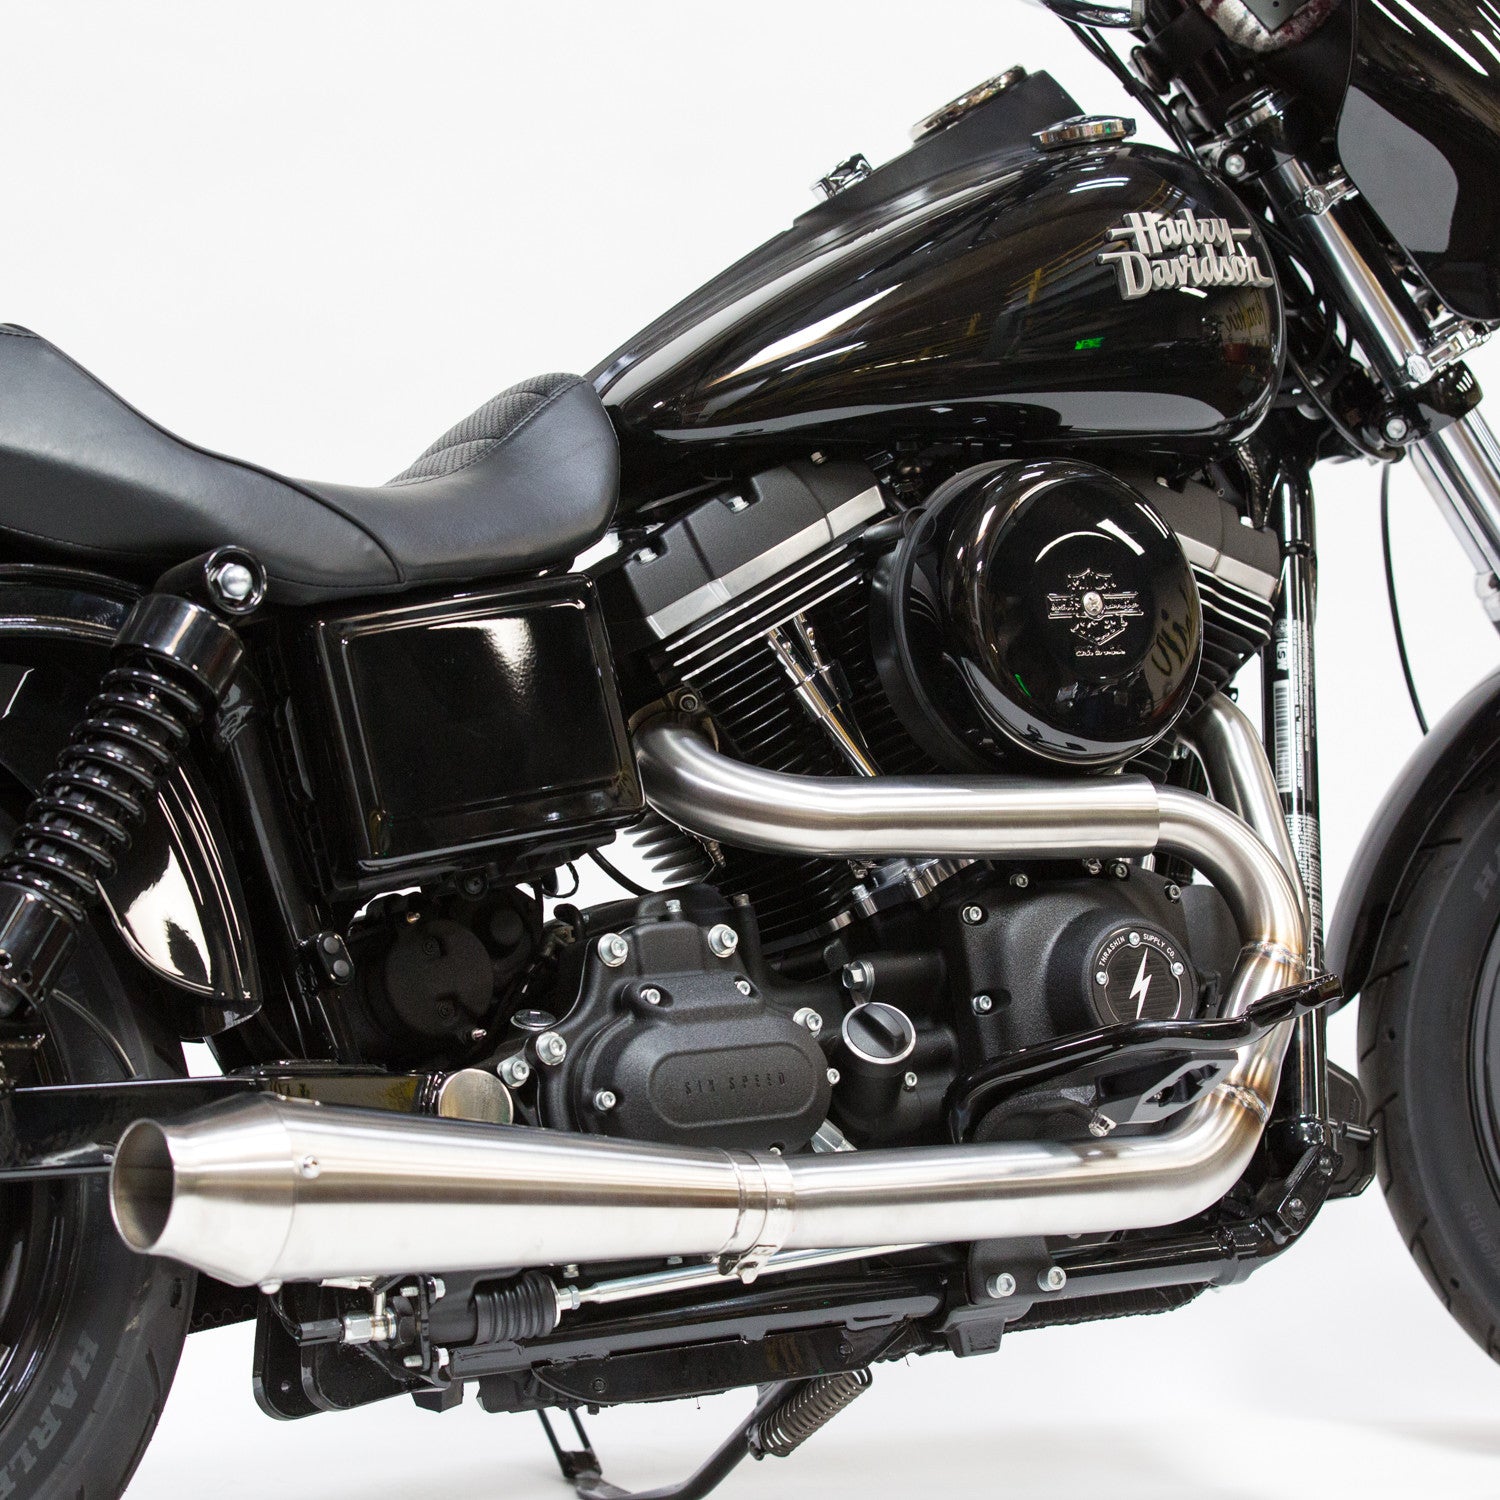 OG Stainless Exhaust w/ Removable Baffle & End Cap   Dyna